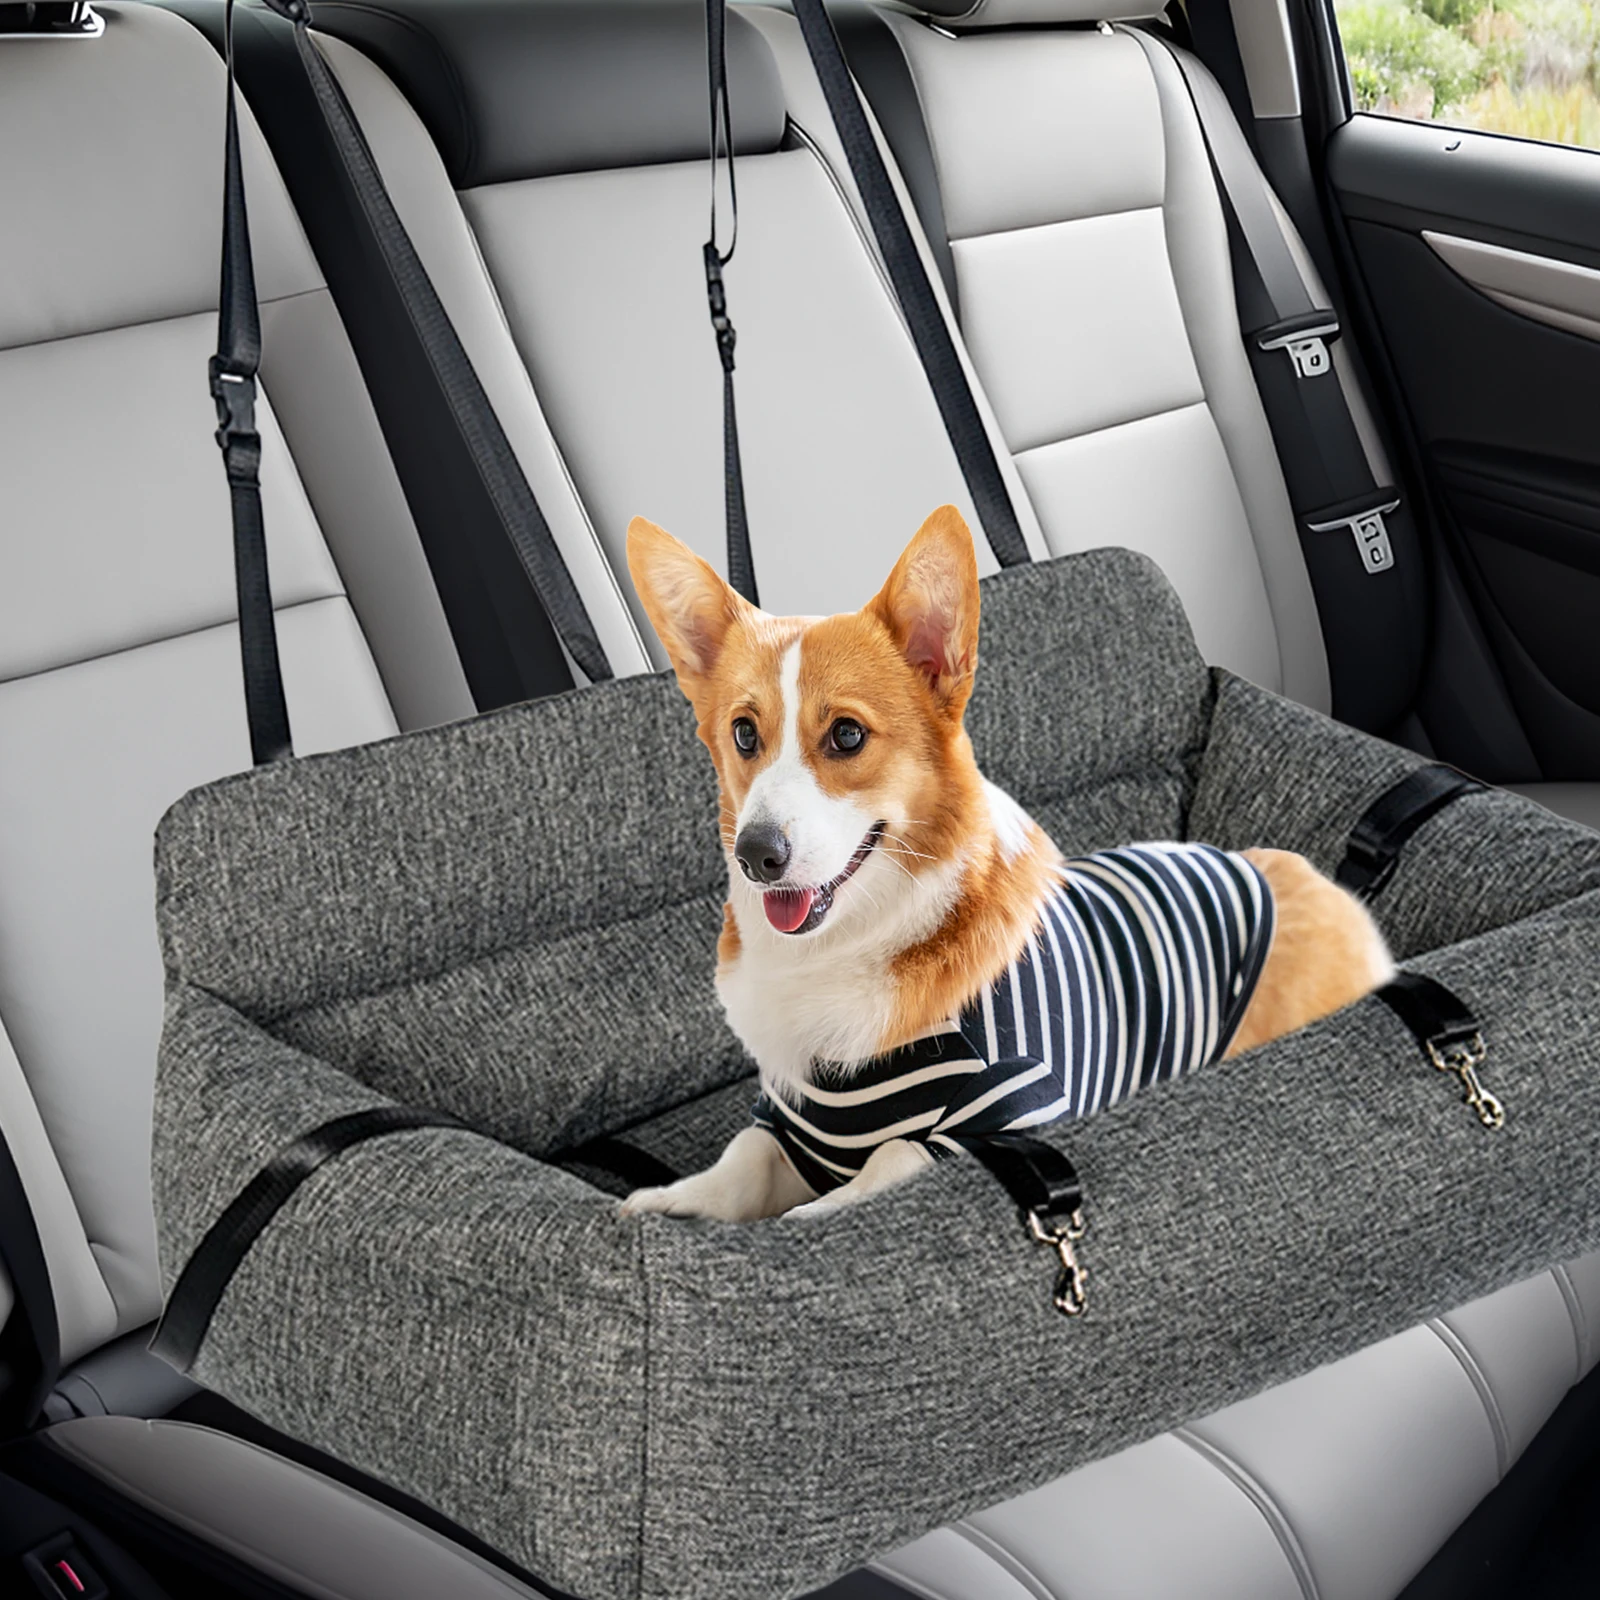 

Pet Cat Dog Carrier Car Seat Soft Dog Booster Seat Safety Puppy Car Travel Accessories Transport Perro For Small Dogs Foldable